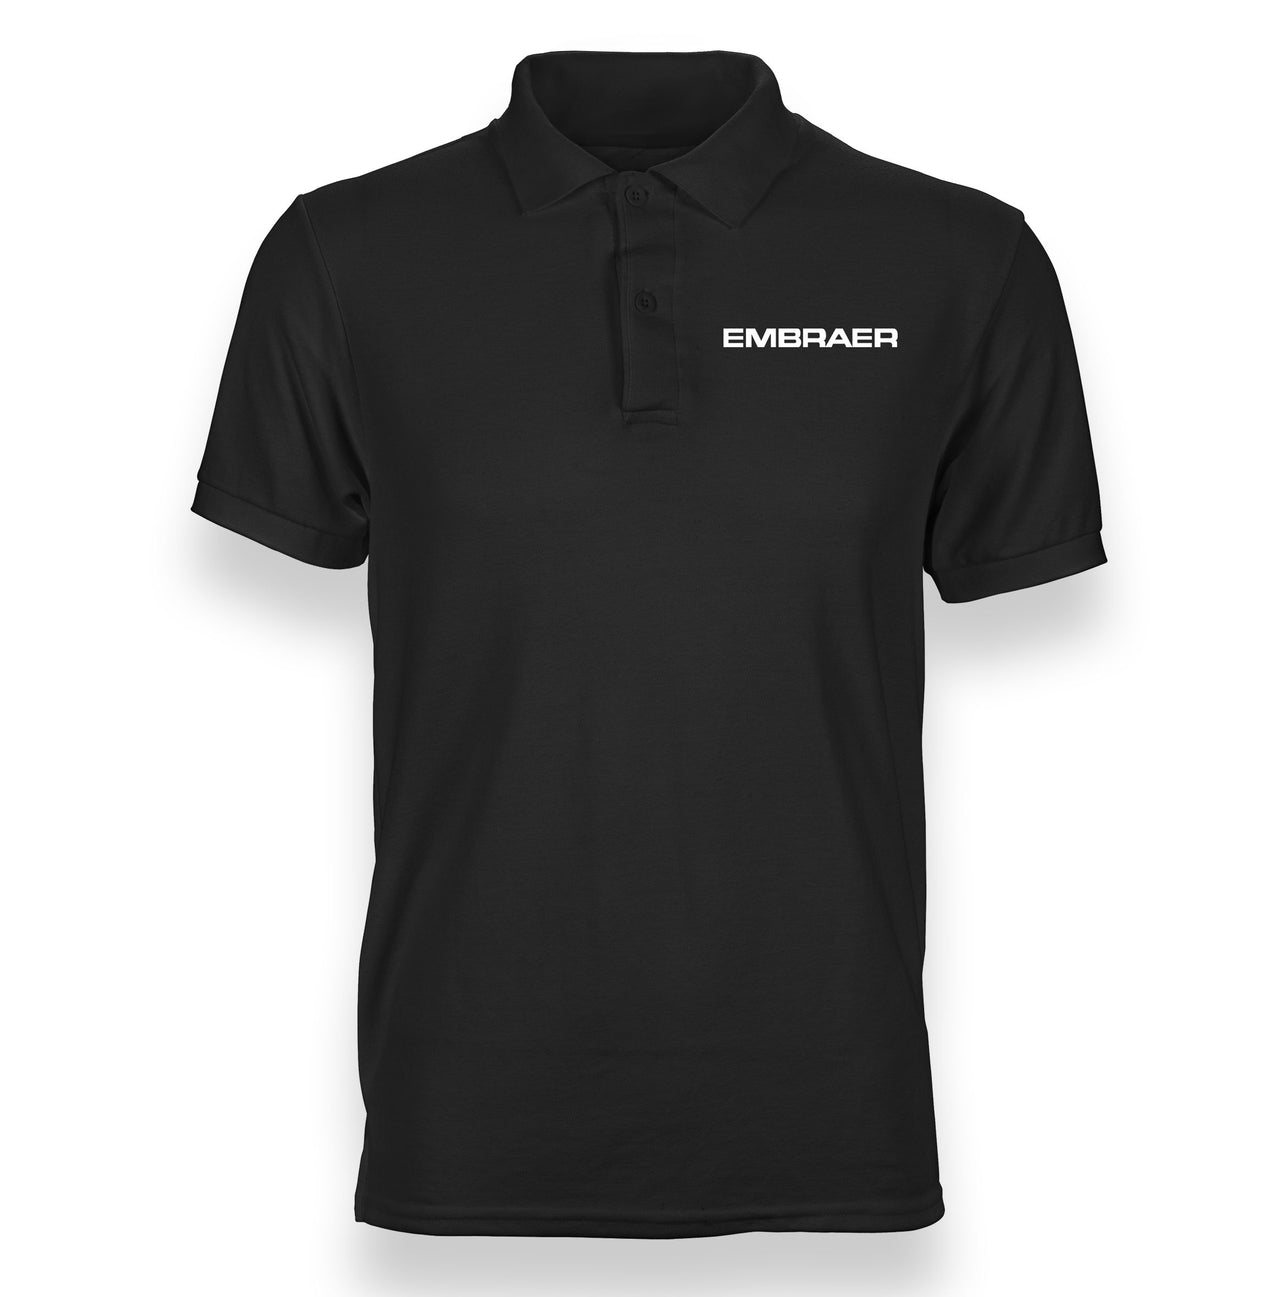 Embraer & Text Designed Polo T-Shirts